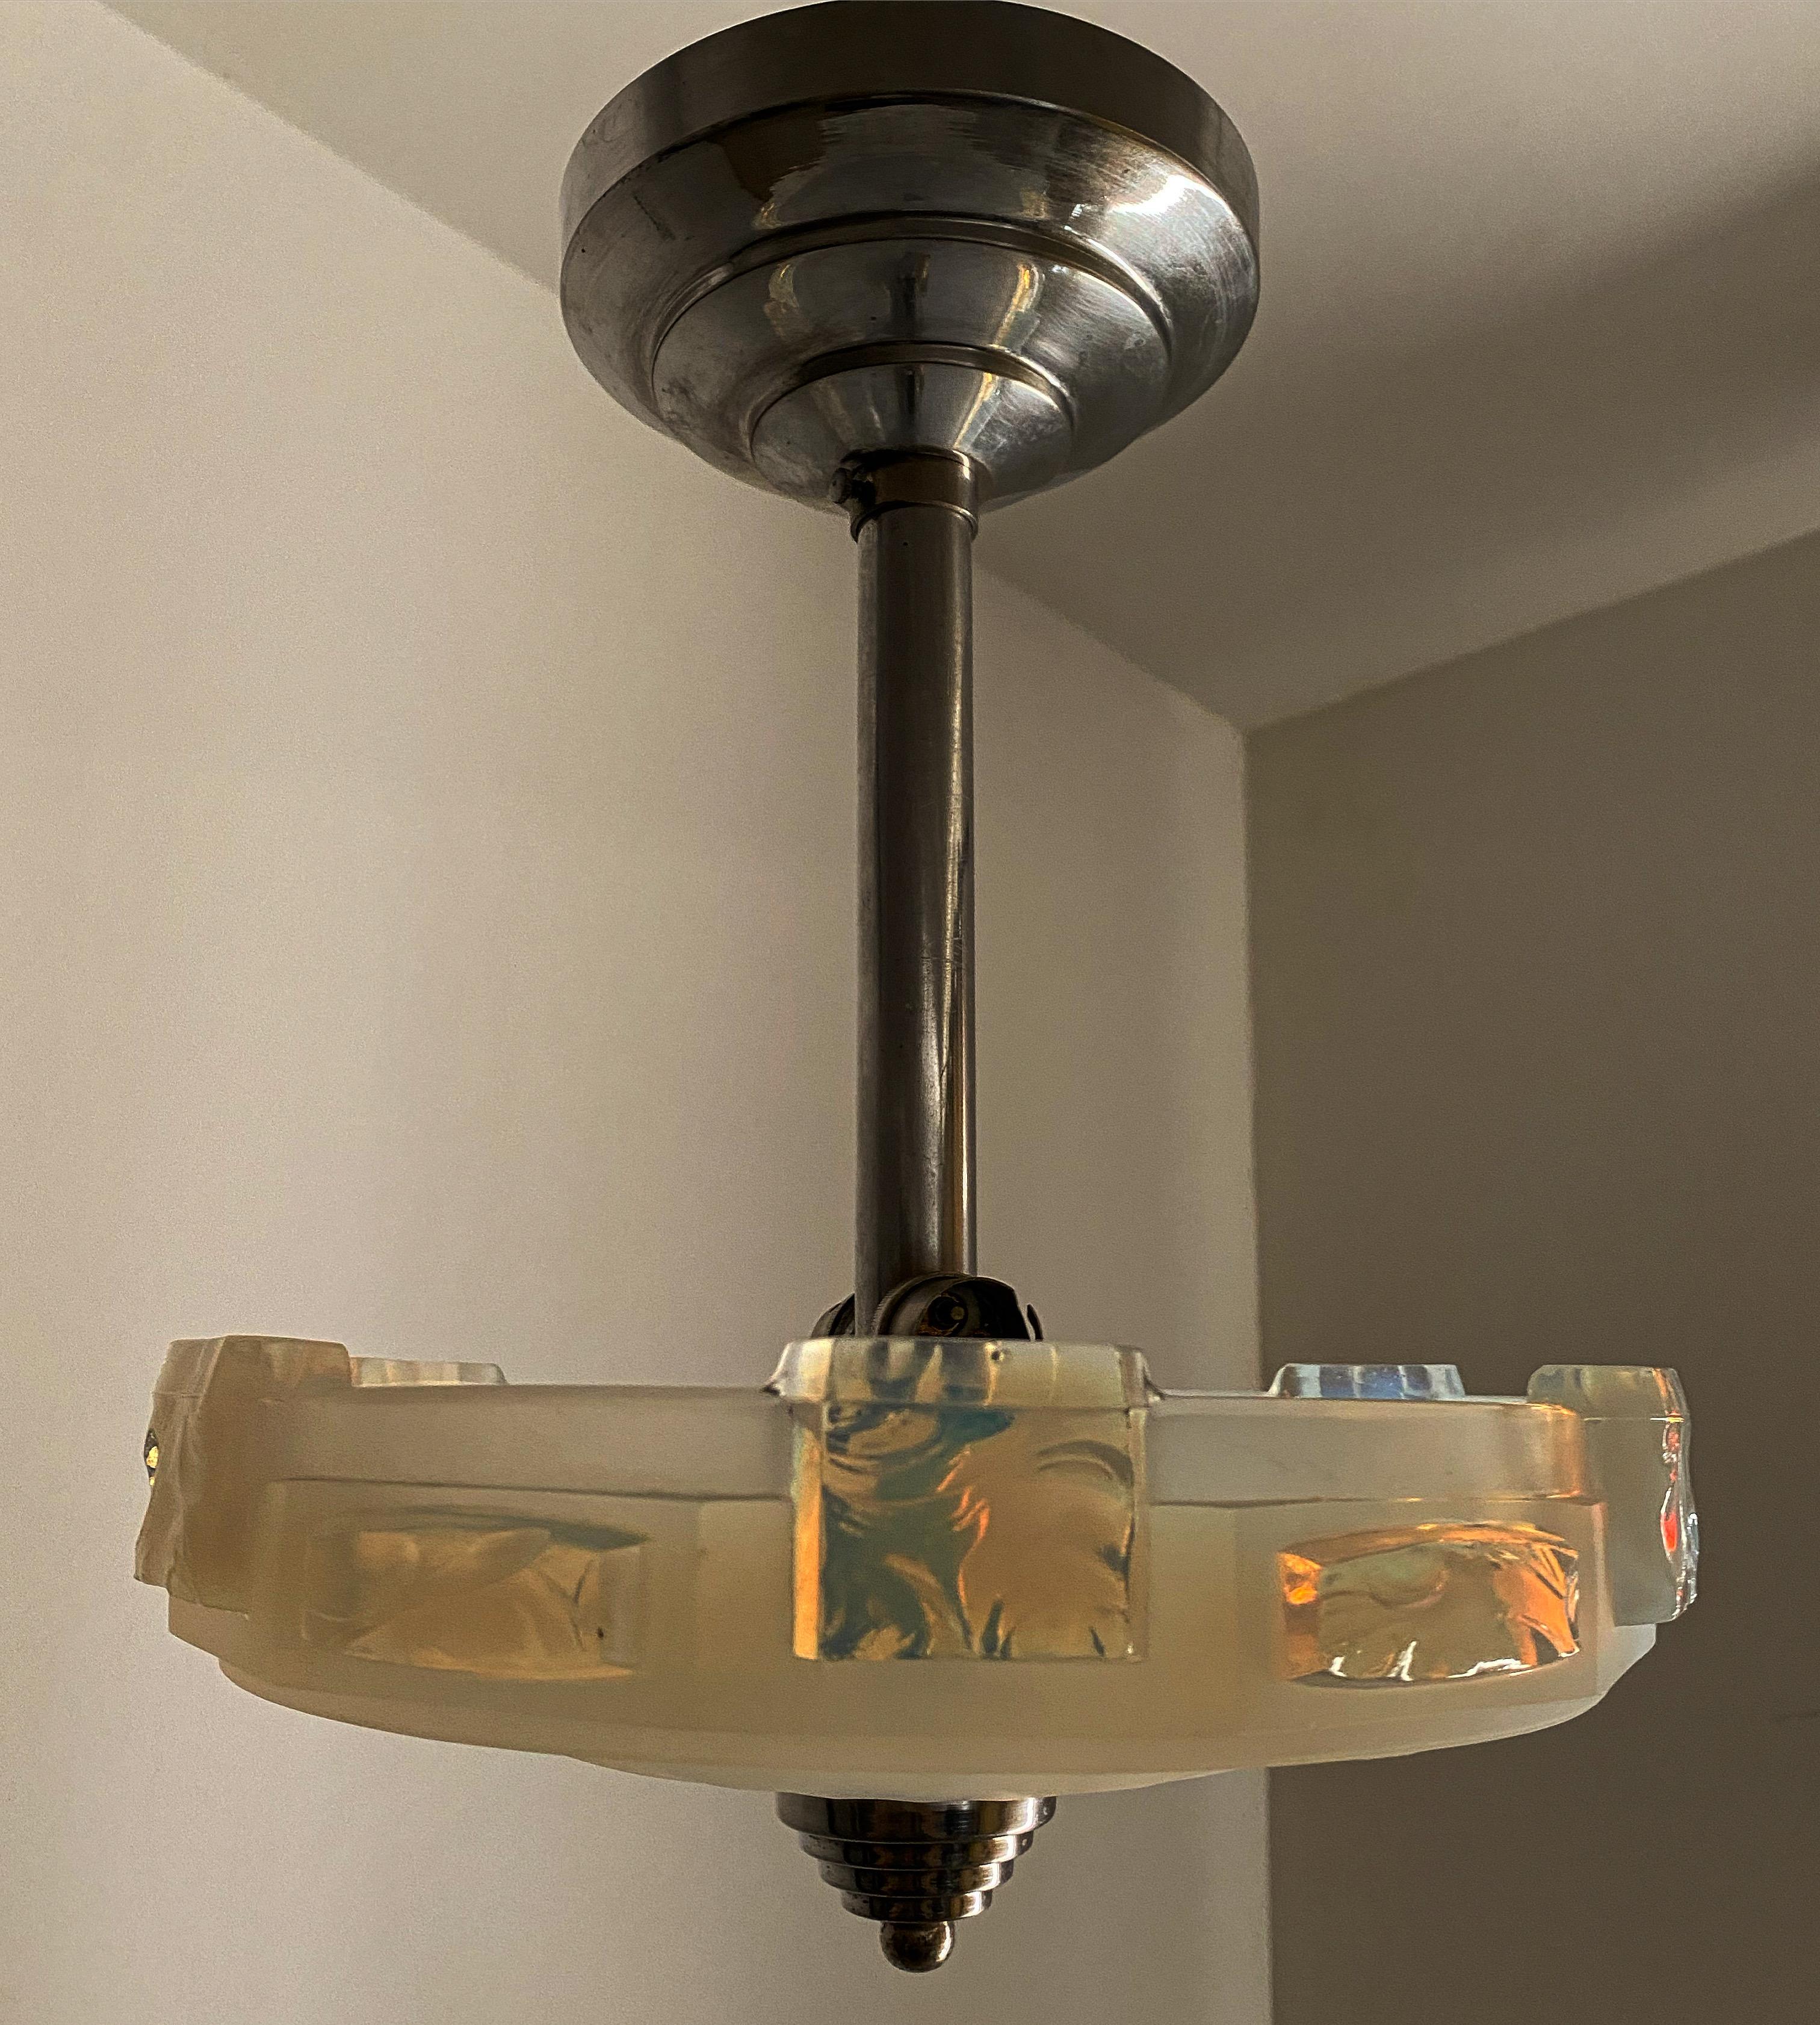 Small pendant light manufactured in France circa 1940. 
It takes 2 bayonette bulbs. 
No signature is present but the style points to Ezan and it is comparable to the works of Petitot, Rene Lalique and many other Art Deco glass manufacturers.